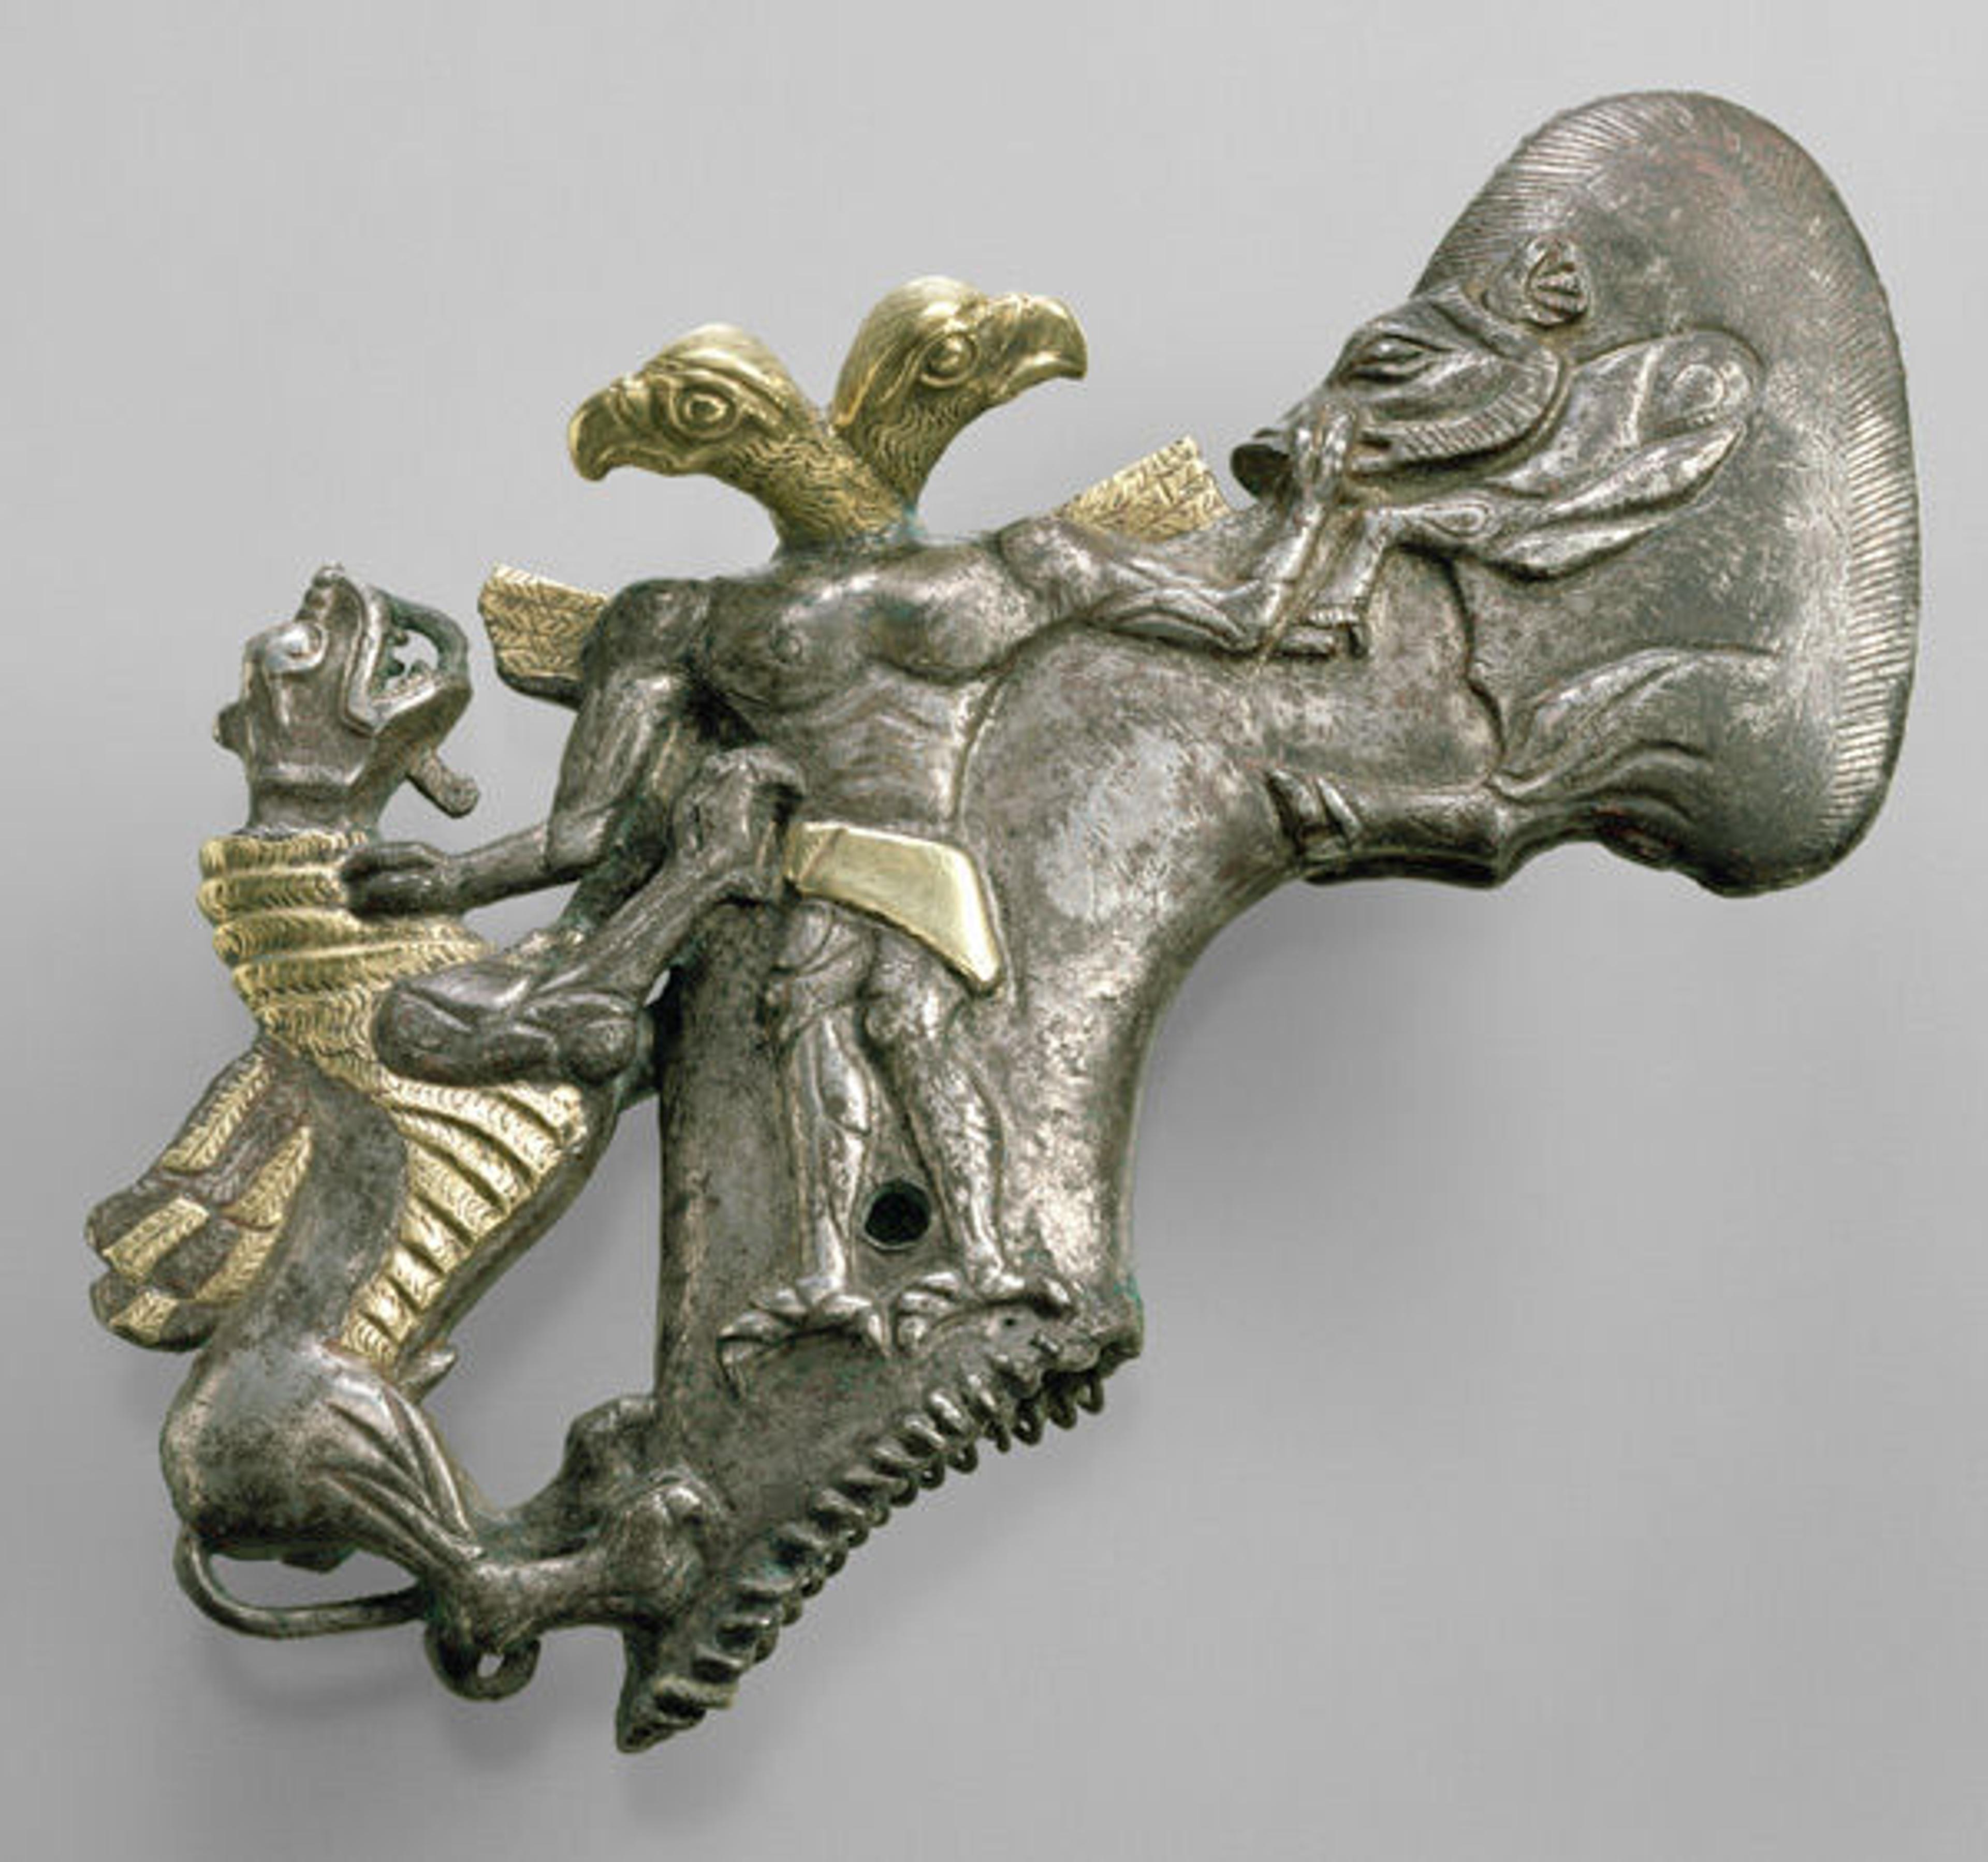 Shaft-hole axe head with bird-headed demon, boar, and dragon, ca. late 3rd–early 2nd millennium B.C. Bactria-Margiana. Silver, gold foil; L. 15 cm. The Metropolitan Museum of Art, New York, Purchase, Harris Brisbane Dick Fund, and James N. Spear and Schimmel Foundation Inc. Gifts, 1982 (1982.5)